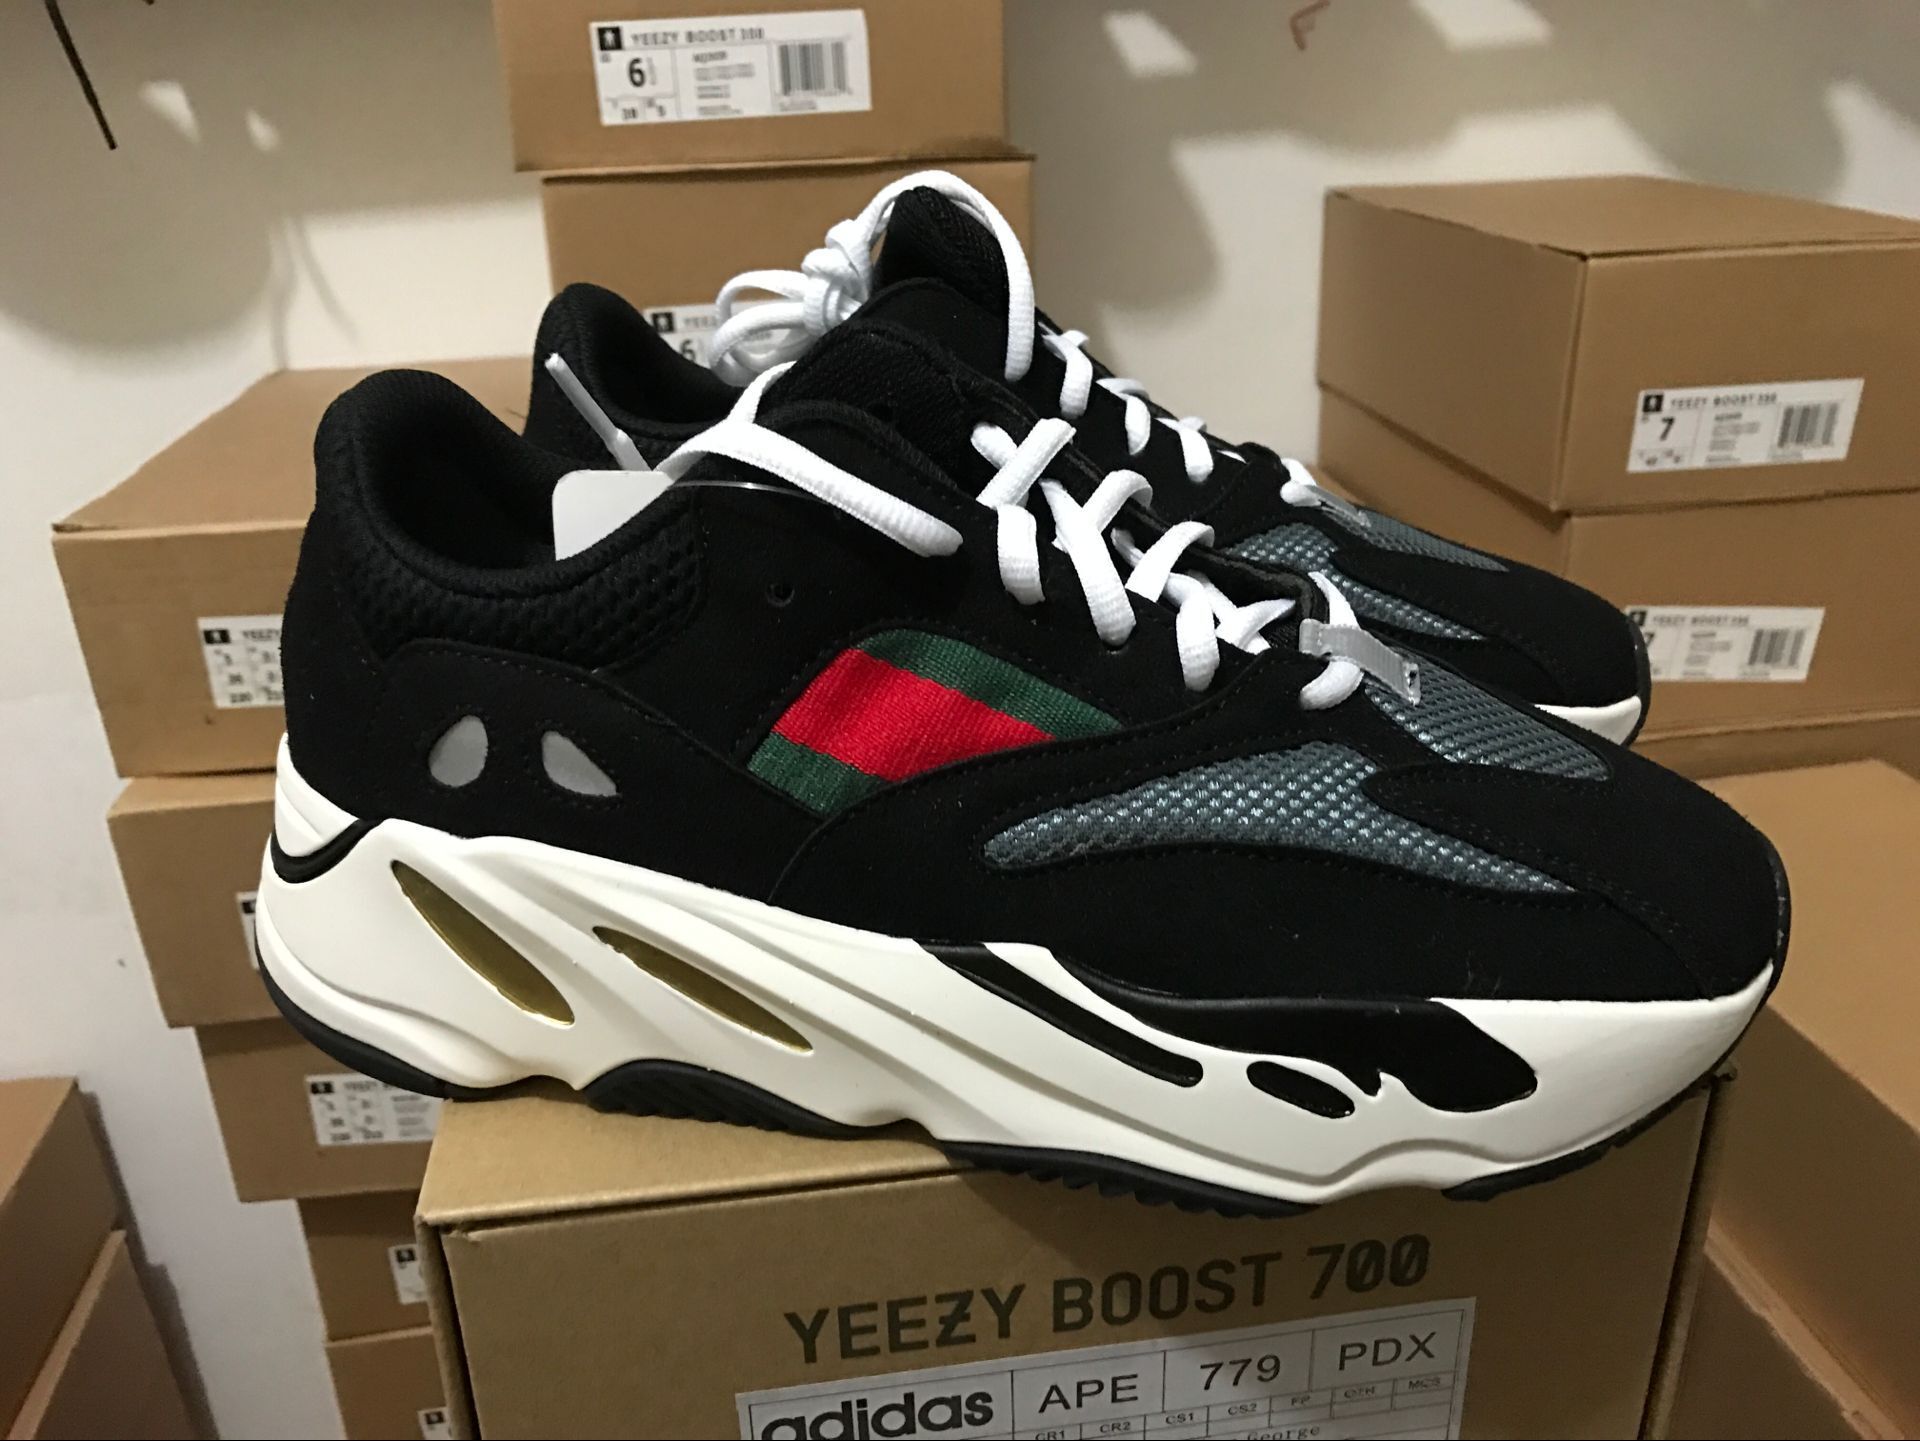 Adidas Yeezy Boost 700 Gucci - SNEAKX